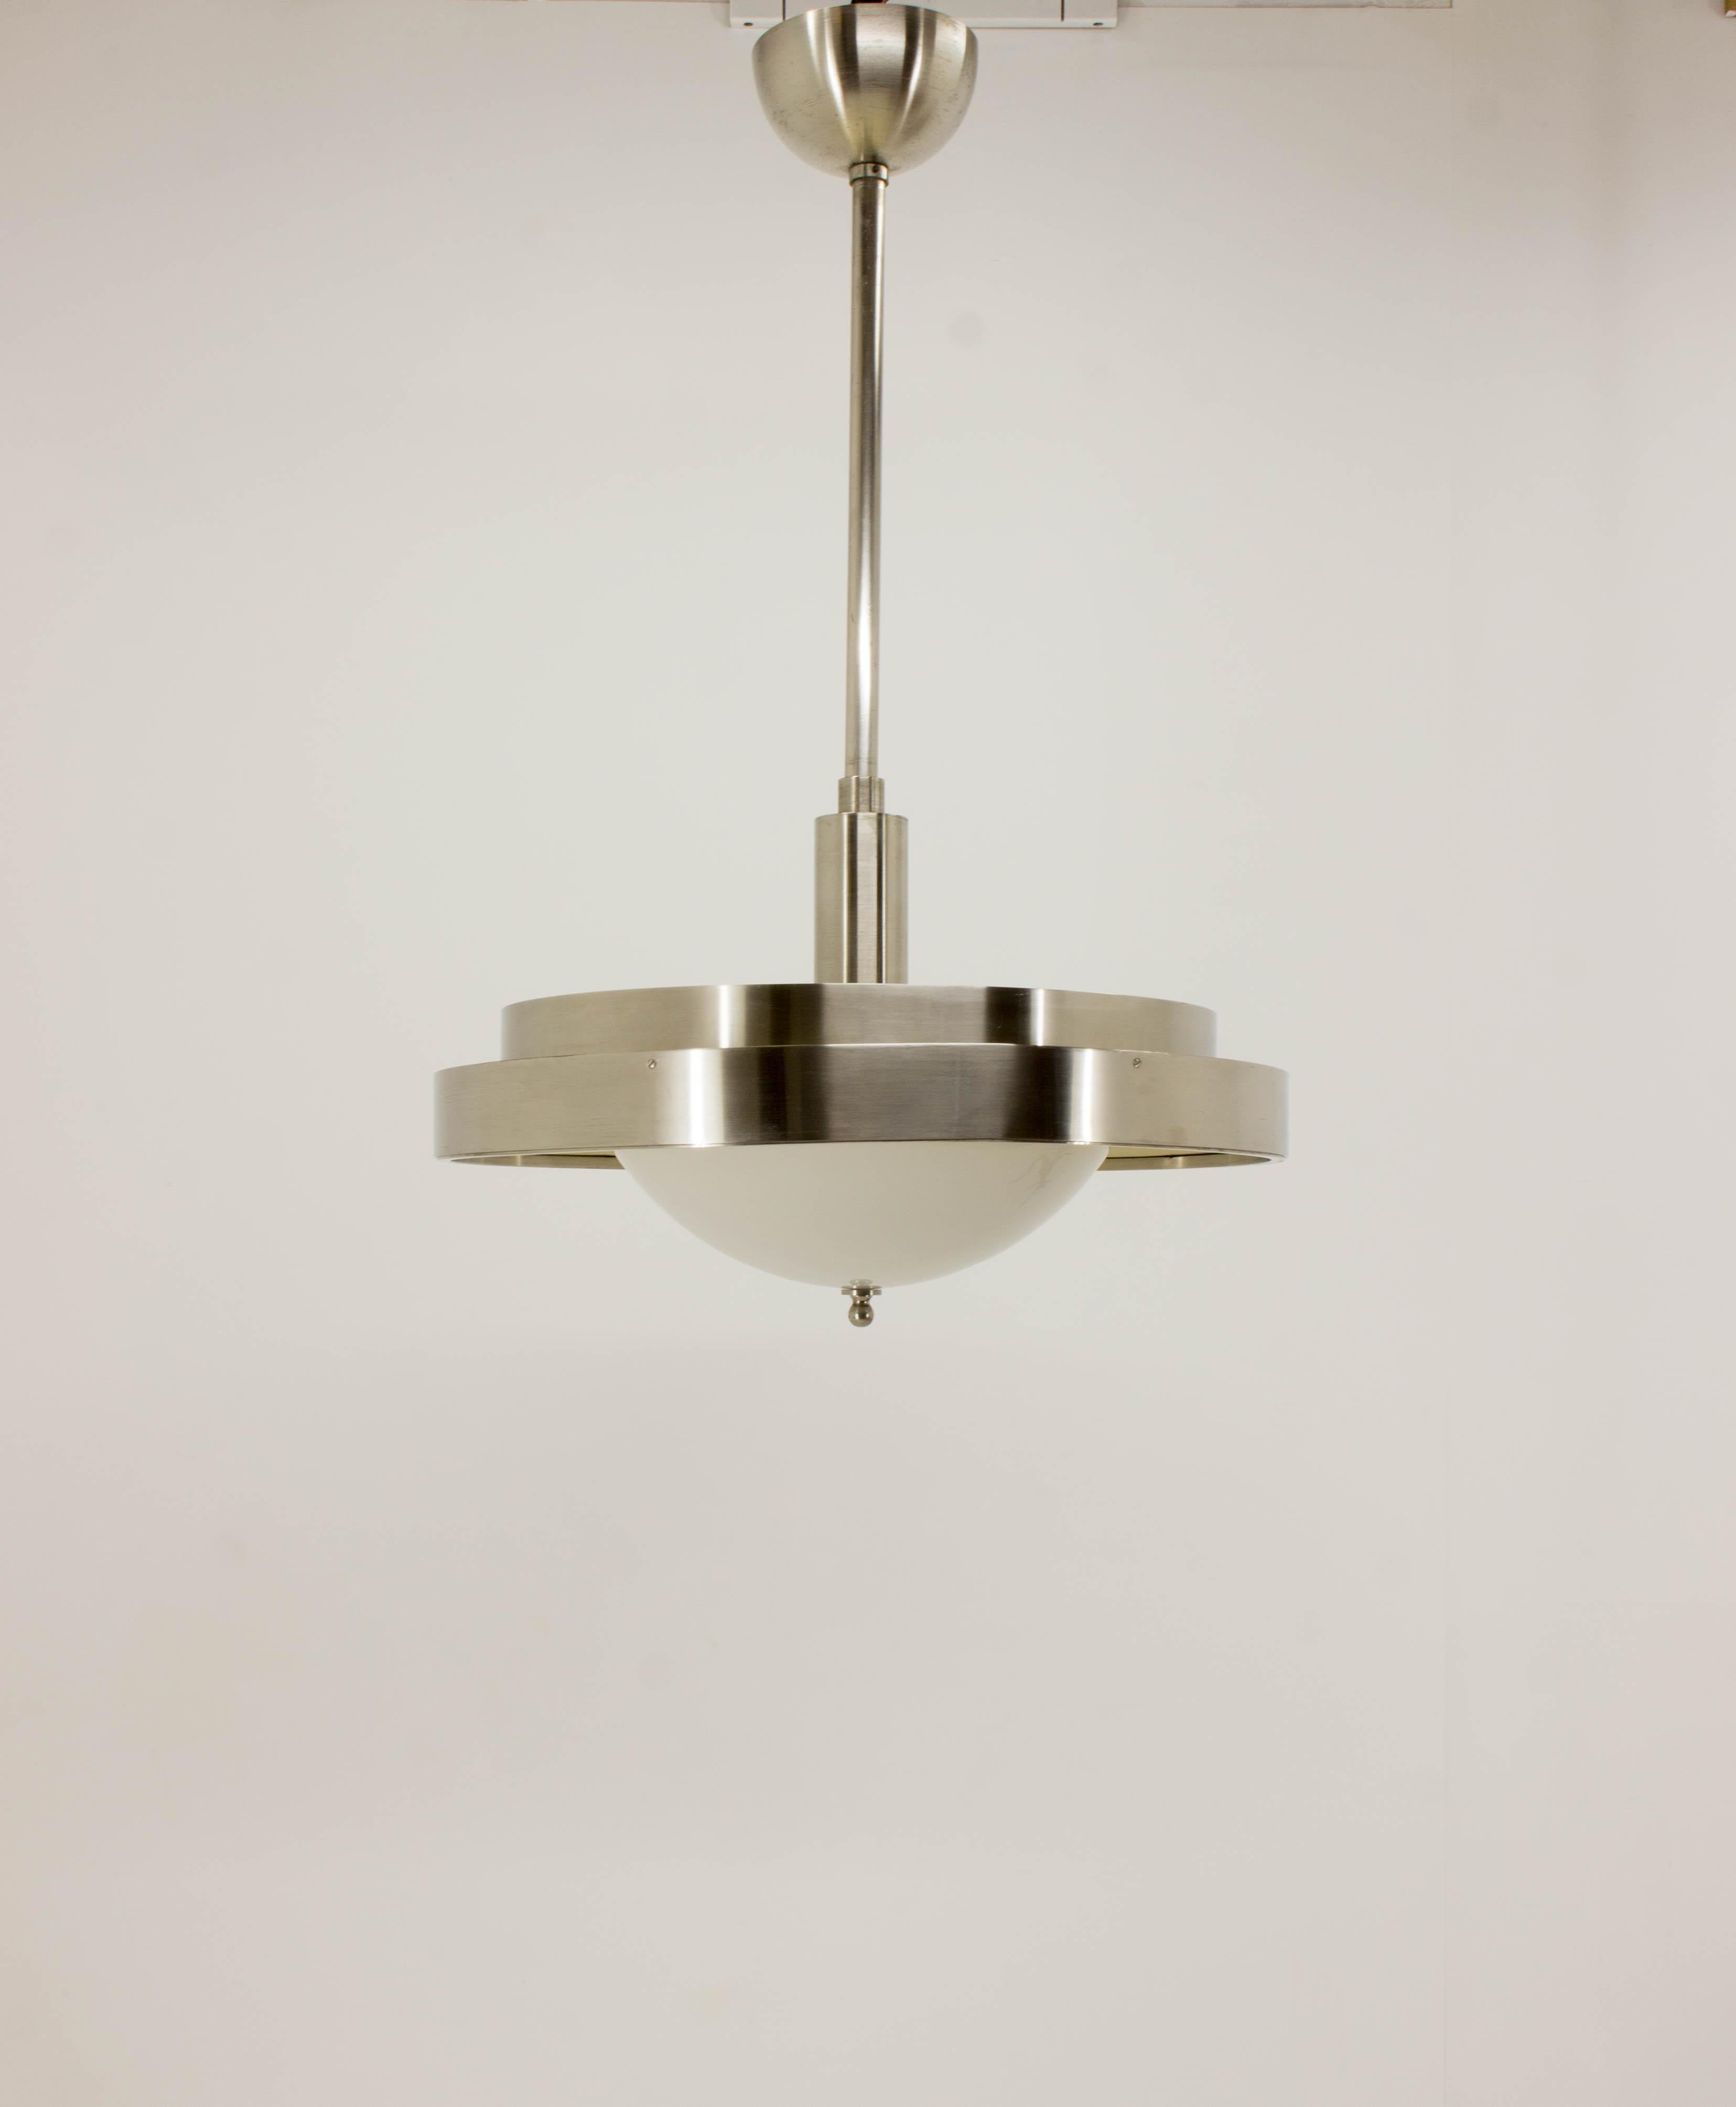 Unique set of nickel plated Bauhaus chandeliers designed by Franta Anyz for bank interiors. They were executed by his company IAS in 1930s. Each item has two separate circuits - upper with four and lower with three bulbs. They were carefully